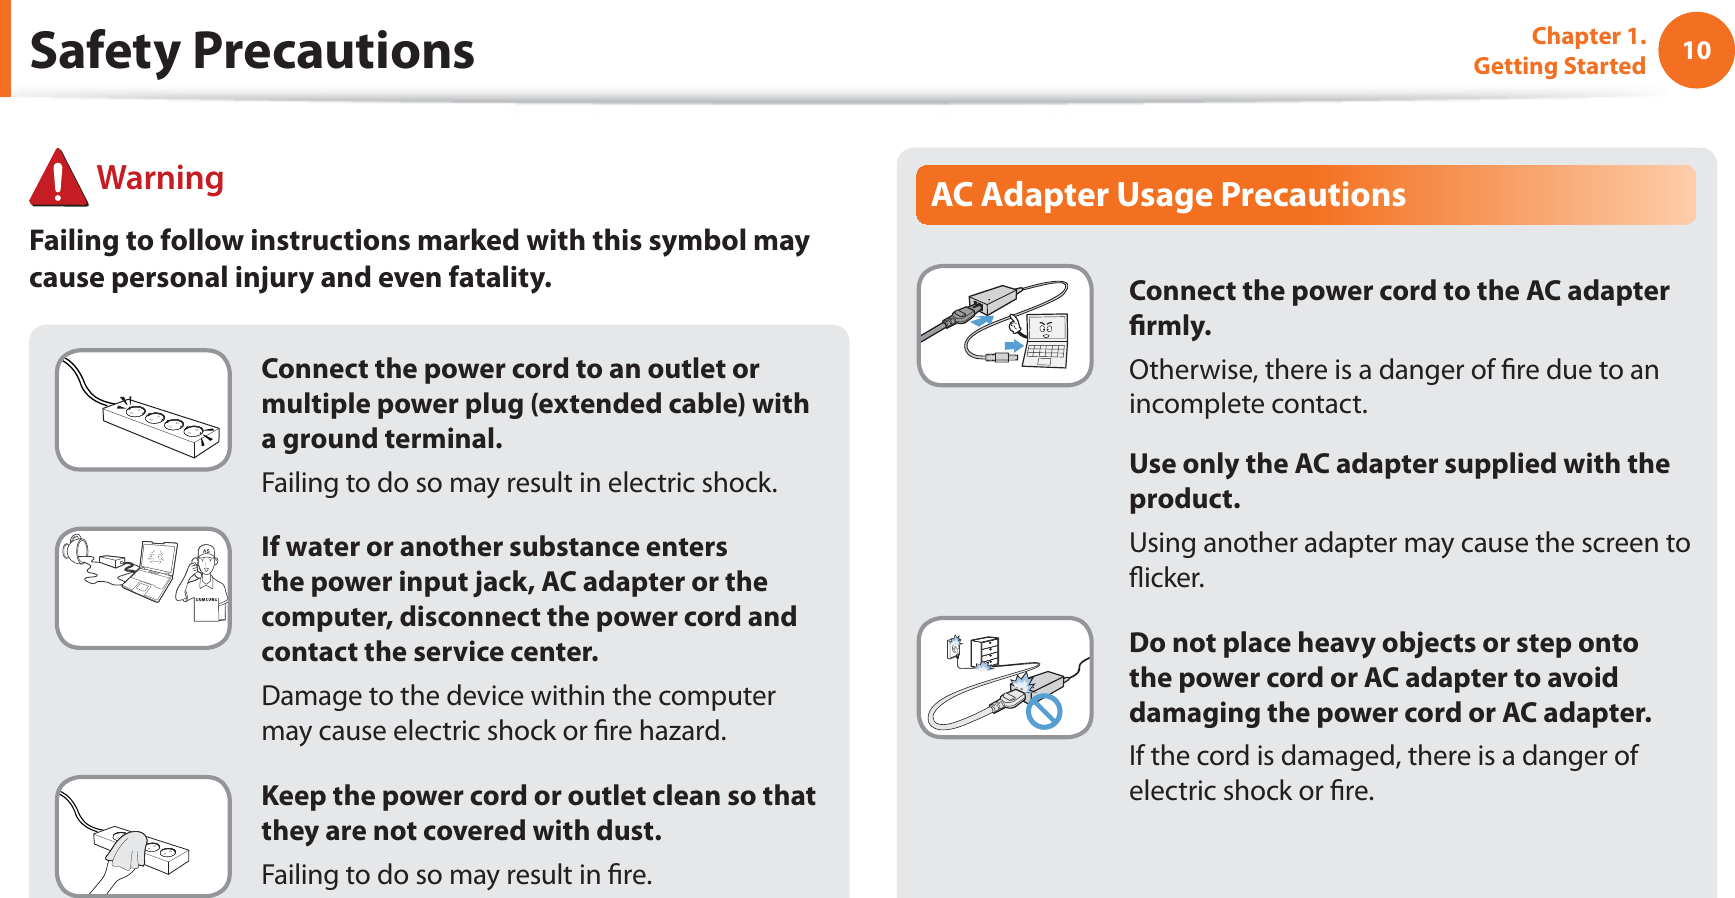 10Chapter 1. Getting StartedConnect the power cord to an outlet or multiple power plug (extended cable) with a ground terminal.Failing to do so may result in electric shock.If water or another substance enters the power input jack, AC adapter or the computer, disconnect the power cord and contact the service center.Damage to the device within the computer may cause electric shock or re hazard.Keep the power cord or outlet clean so that they are not covered with dust.Failing to do so may result in re.AC Adapter Usage PrecautionsConnect the power cord to the AC adapter rmly.Otherwise, there is a danger of re due to an incomplete contact.Use only the AC adapter supplied with the product.Using another adapter may cause the screen to icker.Do not place heavy objects or step onto the power cord or AC adapter to avoid damaging the power cord or AC adapter.If the cord is damaged, there is a danger of electric shock or re. WarningFailing to follow instructions marked with this symbol may cause personal injury and even fatality.Safety Precautions